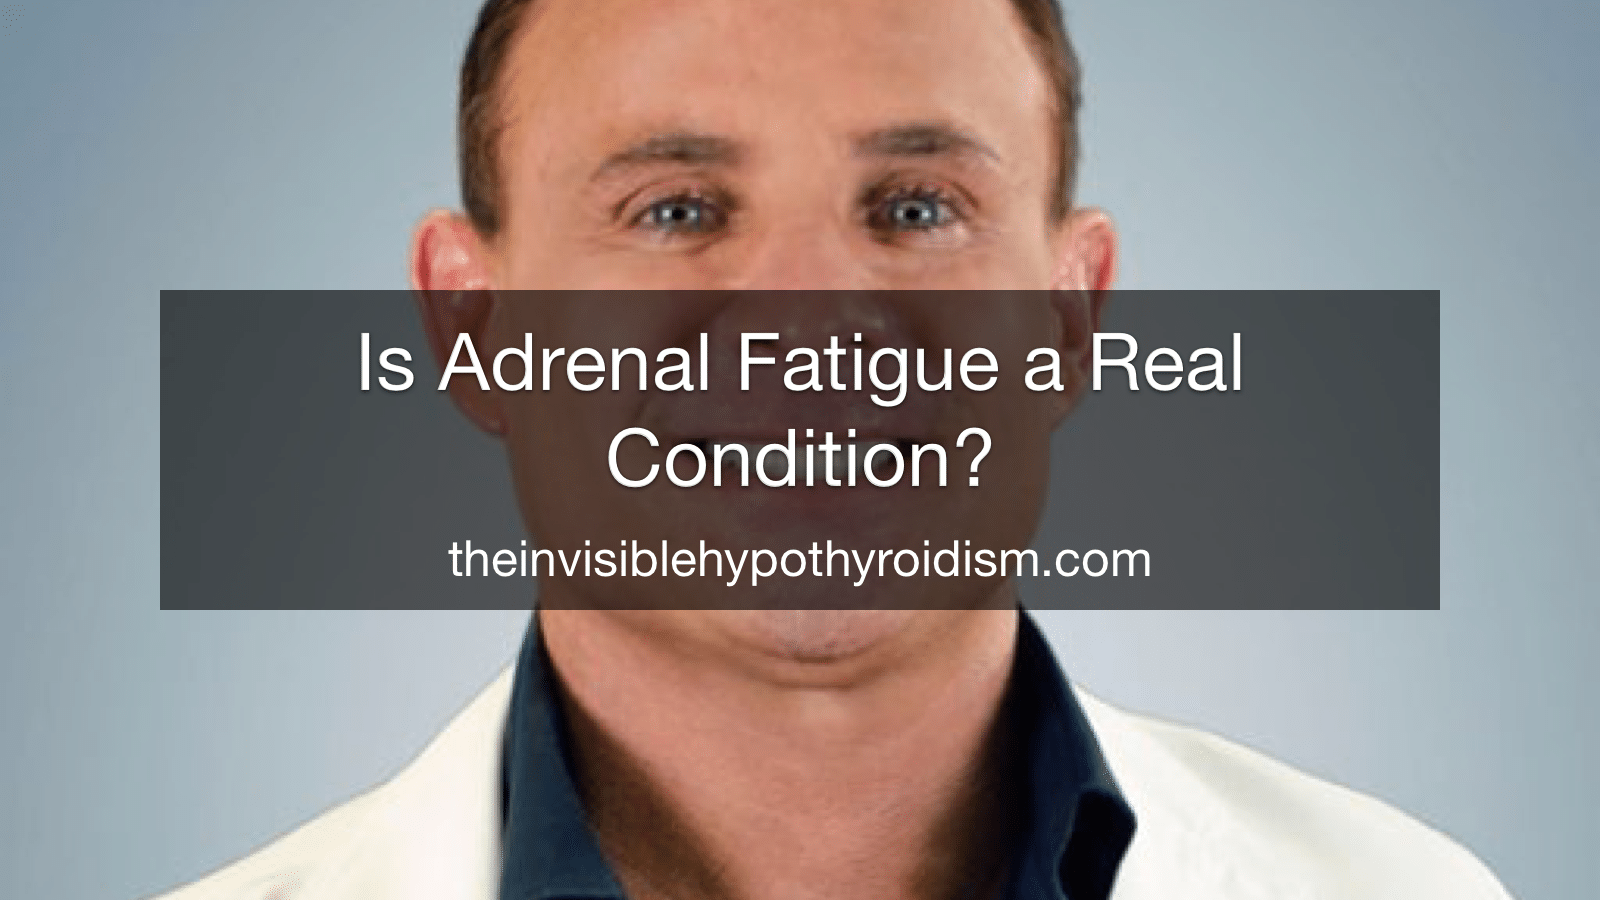 Is Adrenal Fatigue a Real Condition?